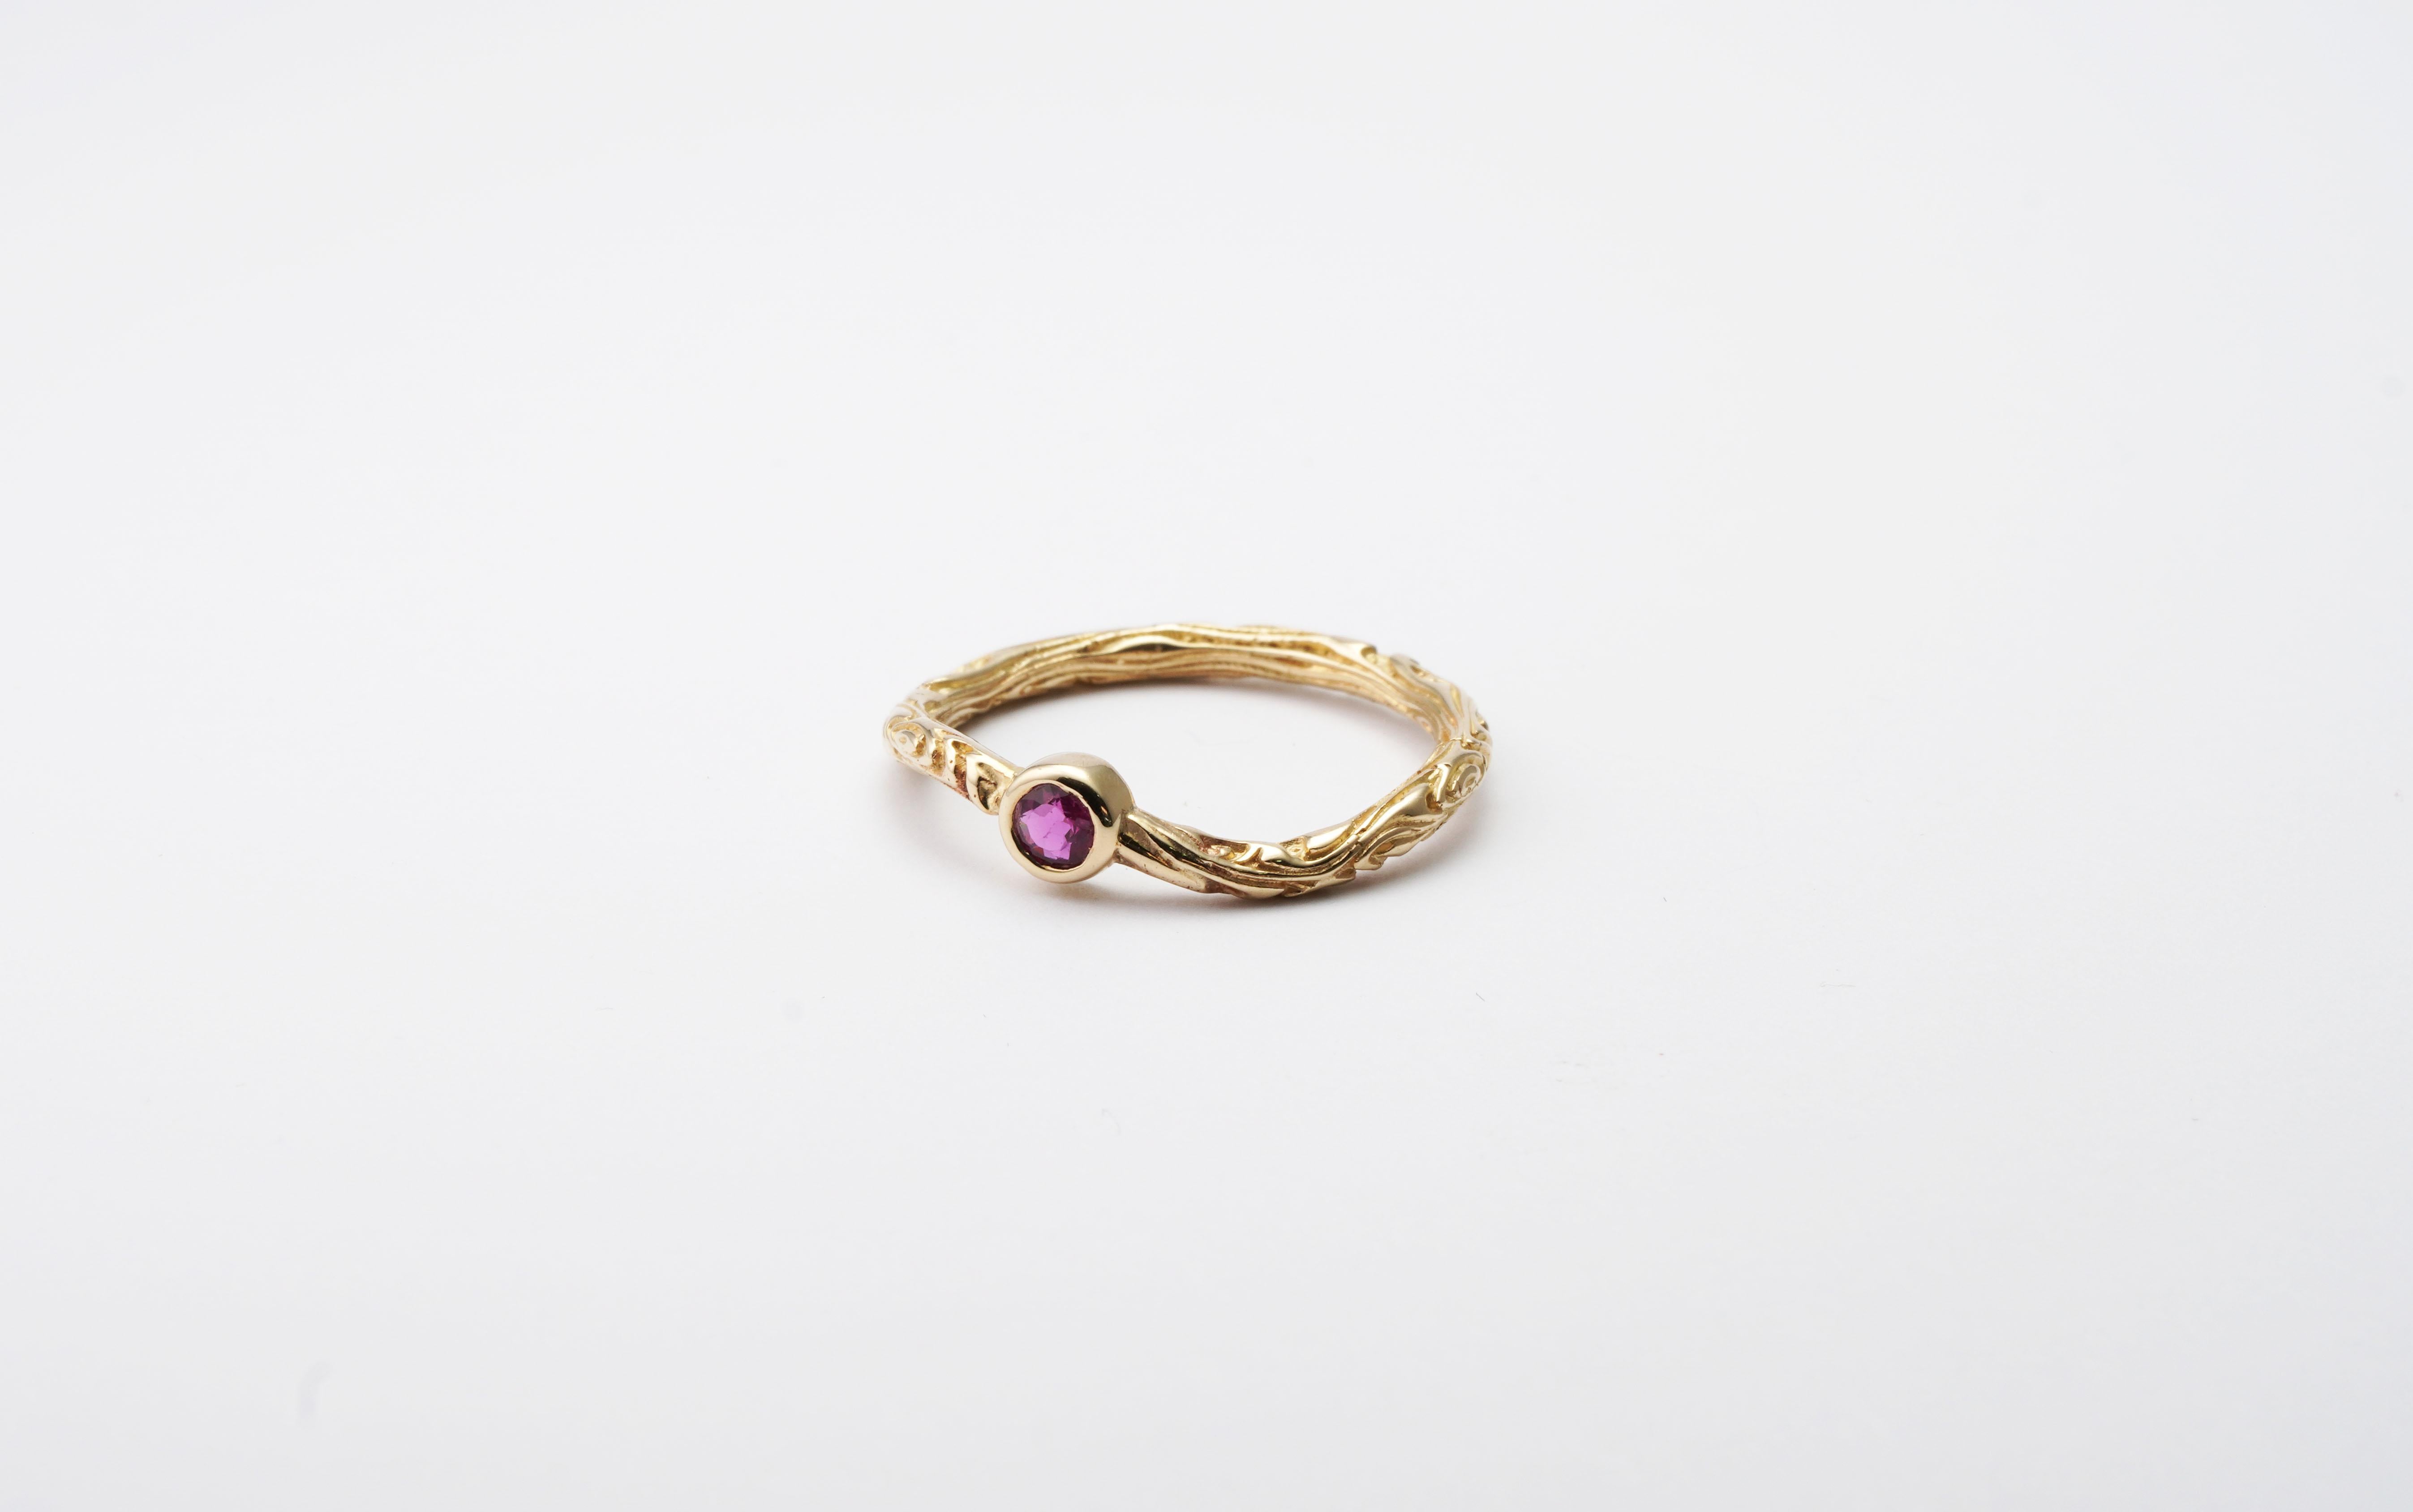 14 kt Gold ring with Ruby
Gold color: Yellow
Ring size: 6 1/2 US
Total weight: 2.30 grams

Set with:
- Ruby
Cut: Brilliant
Color: Red